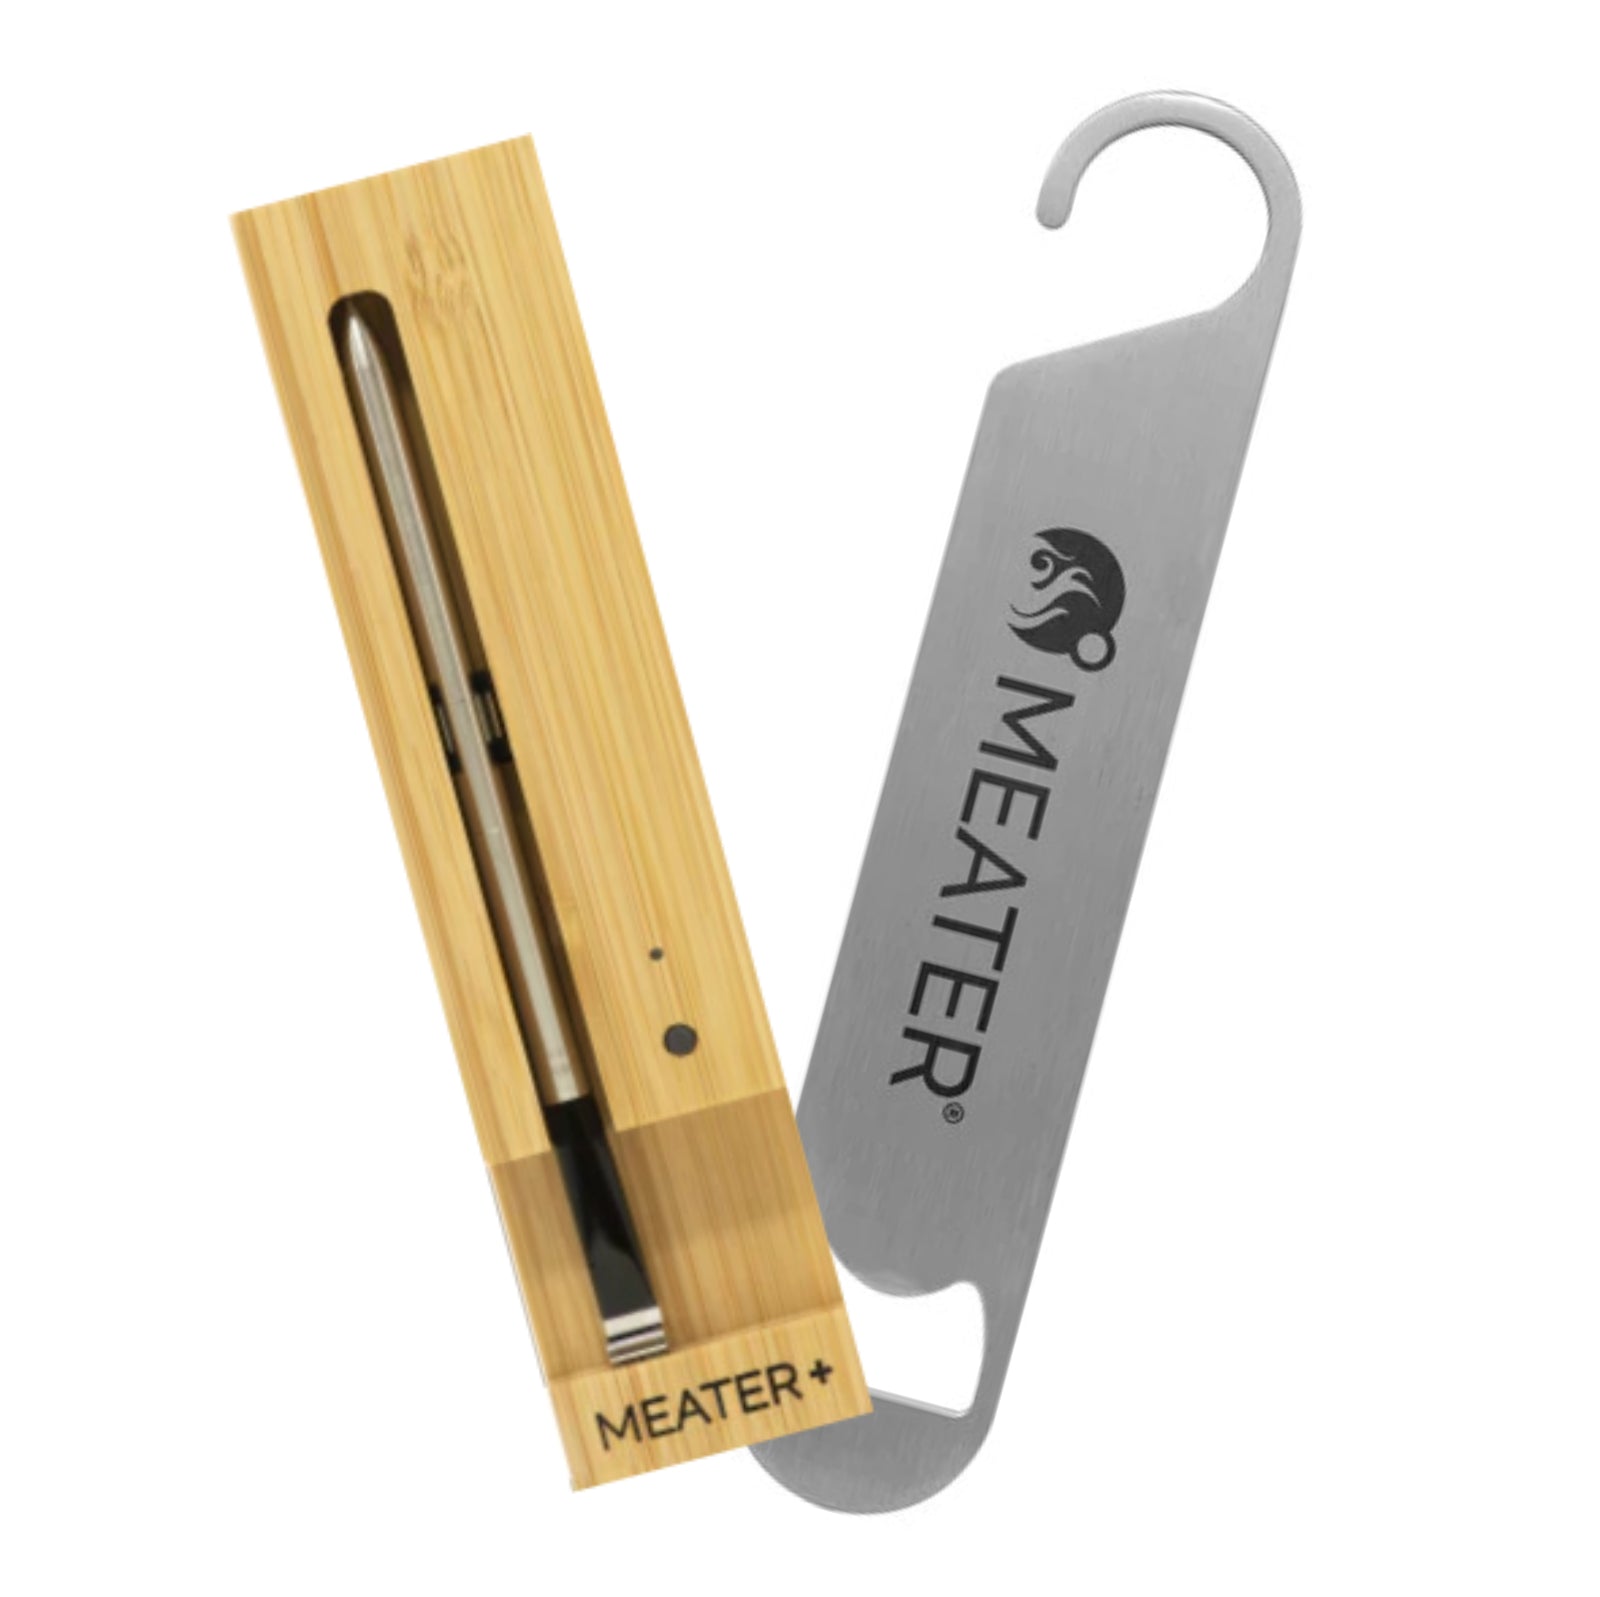 MEATER Plus with Bottle Opener Value Pack